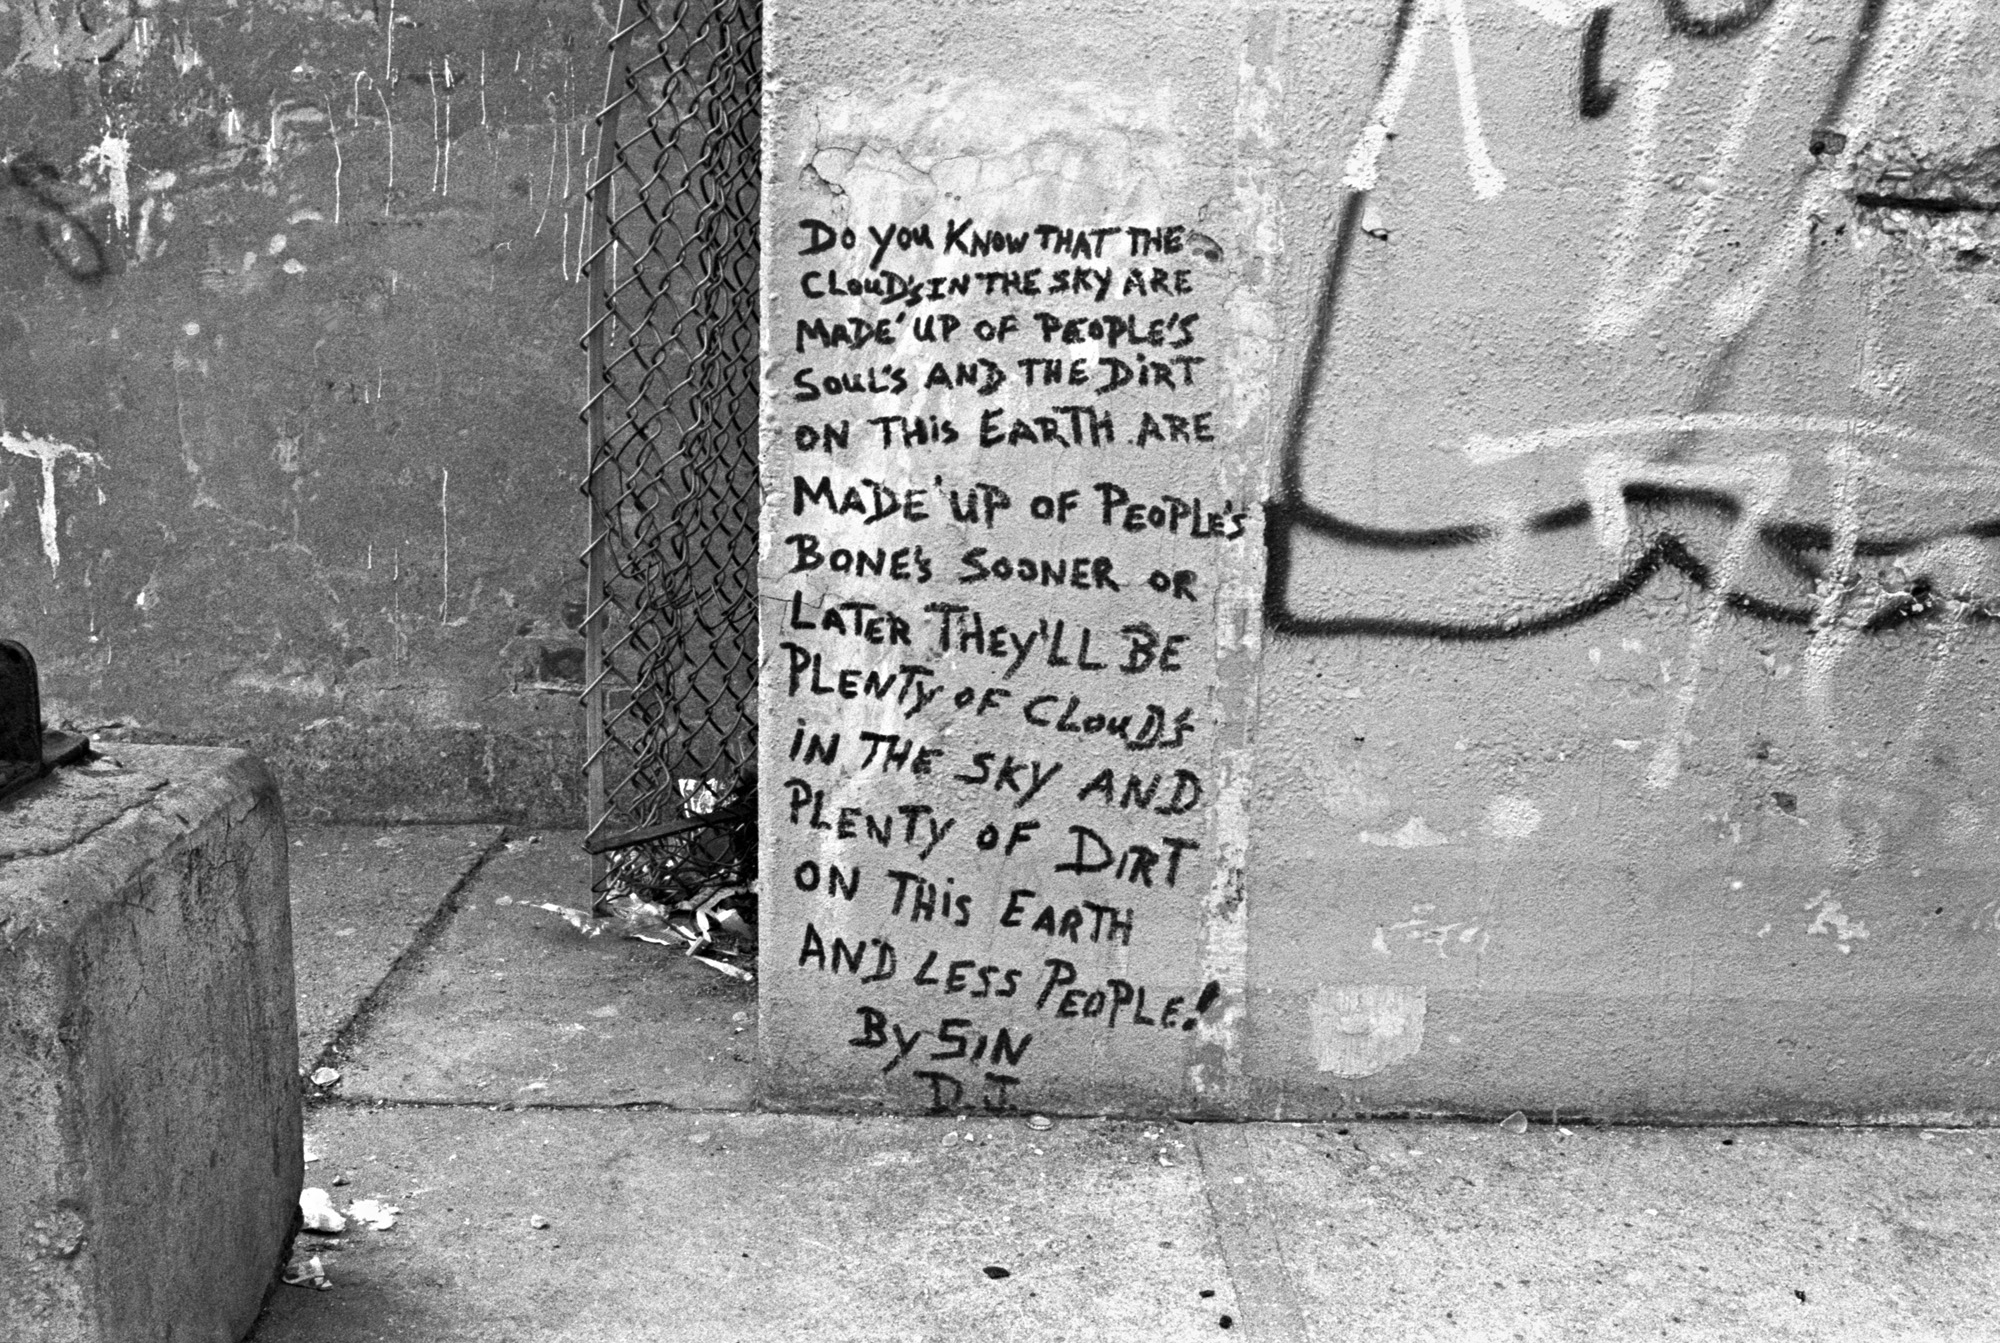 a black and white photograph of some graffiti written on a dirty wall